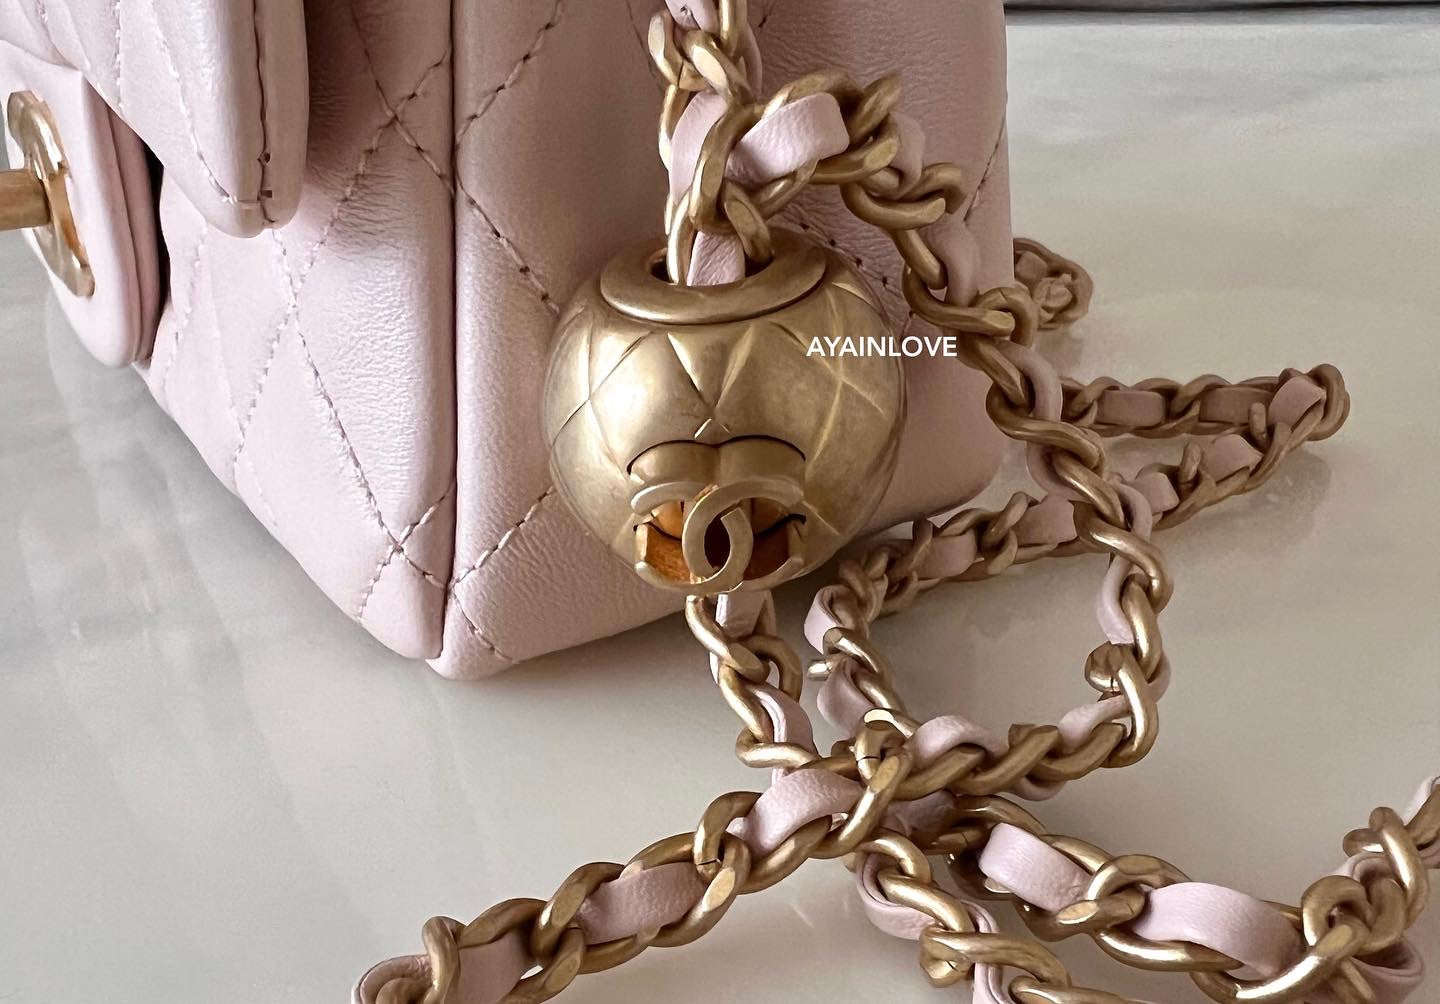 Chanel Pink Quilted Lambskin Mini Flap Bag Pearl Crush Aged Gold